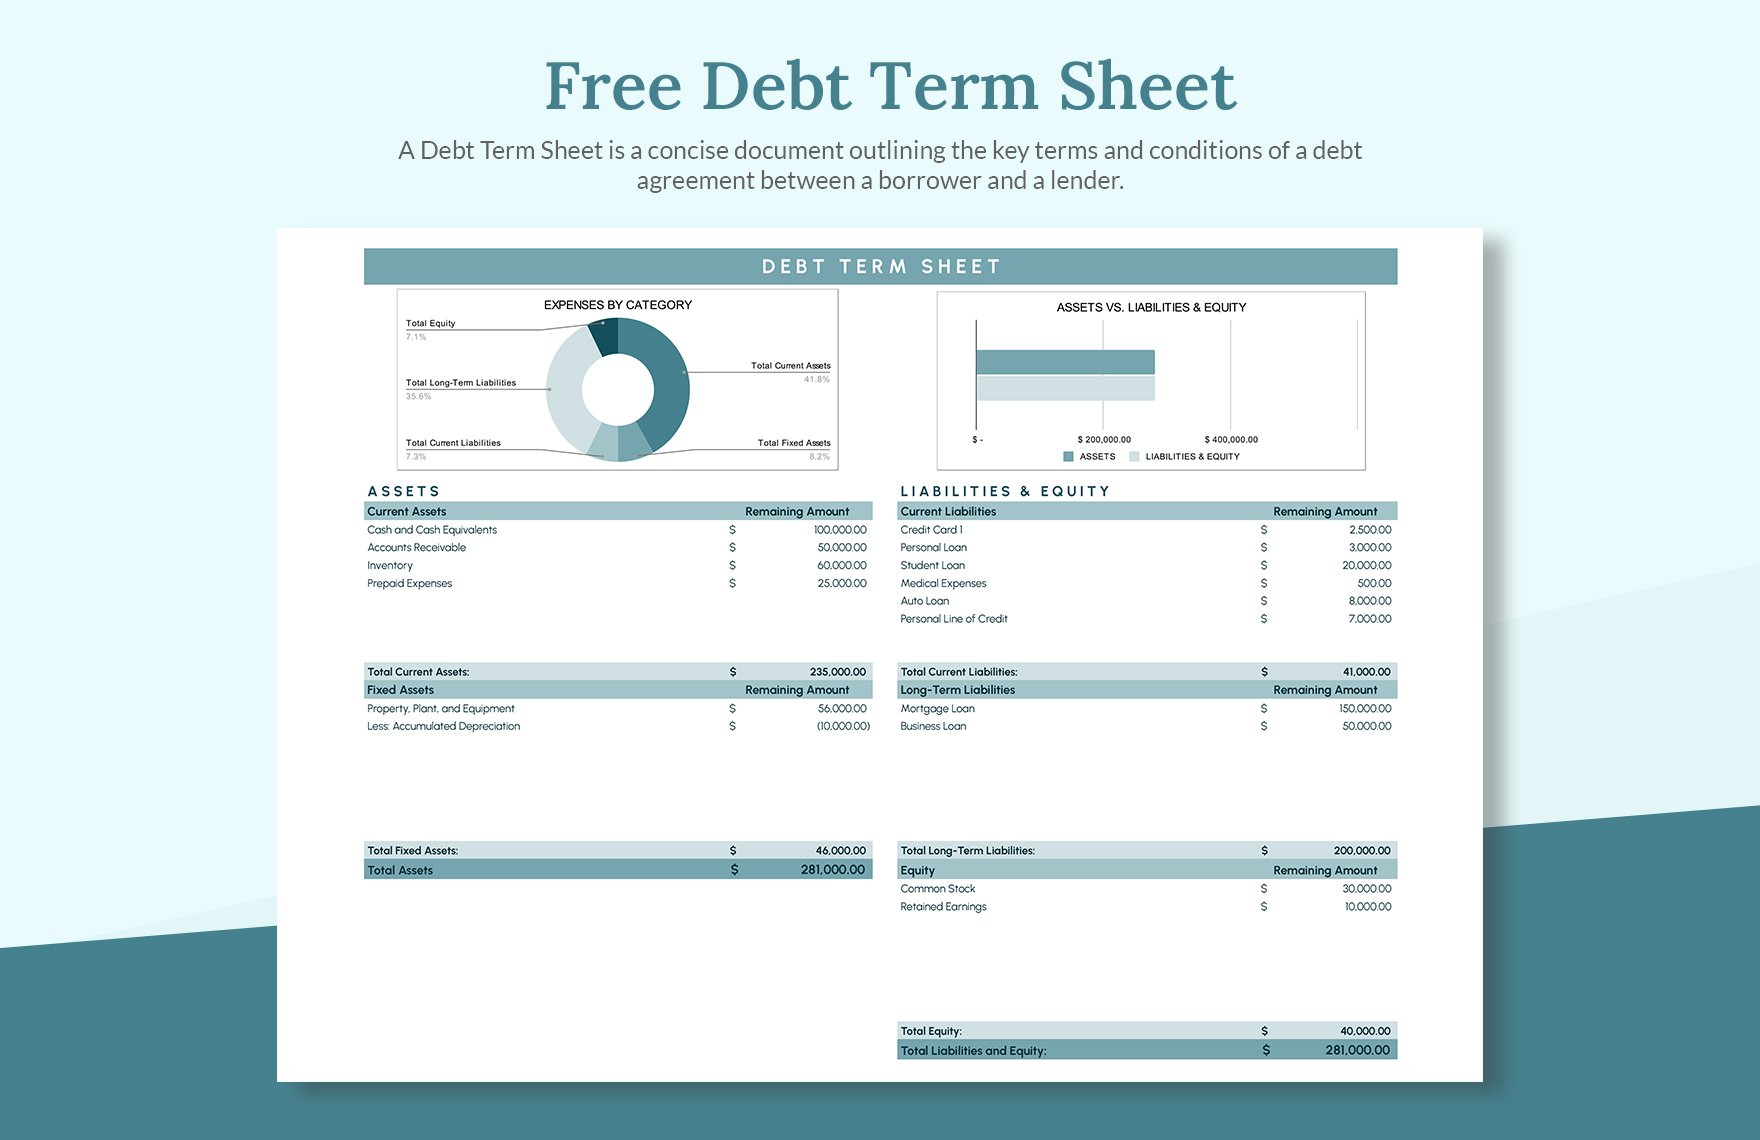 Free Debt Term Sheet Template in Excel, Google Sheets